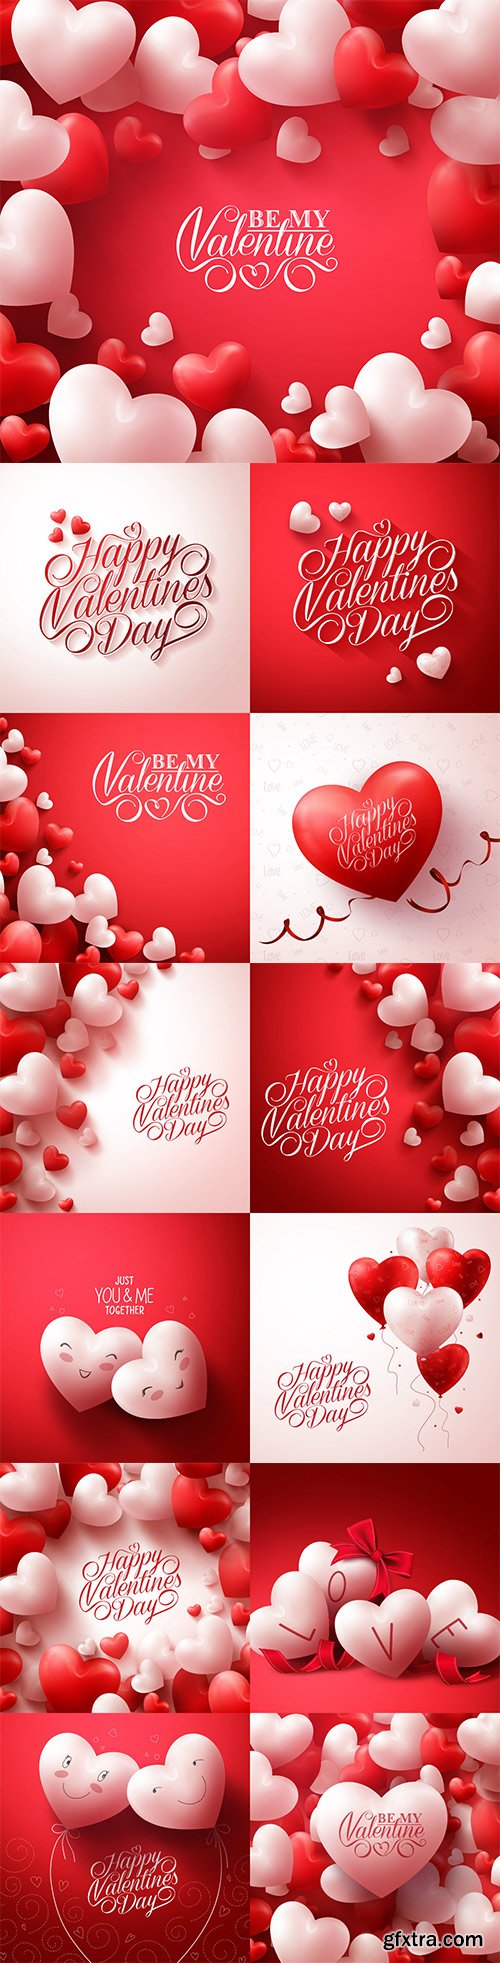 Romantic backgrounds with hearts